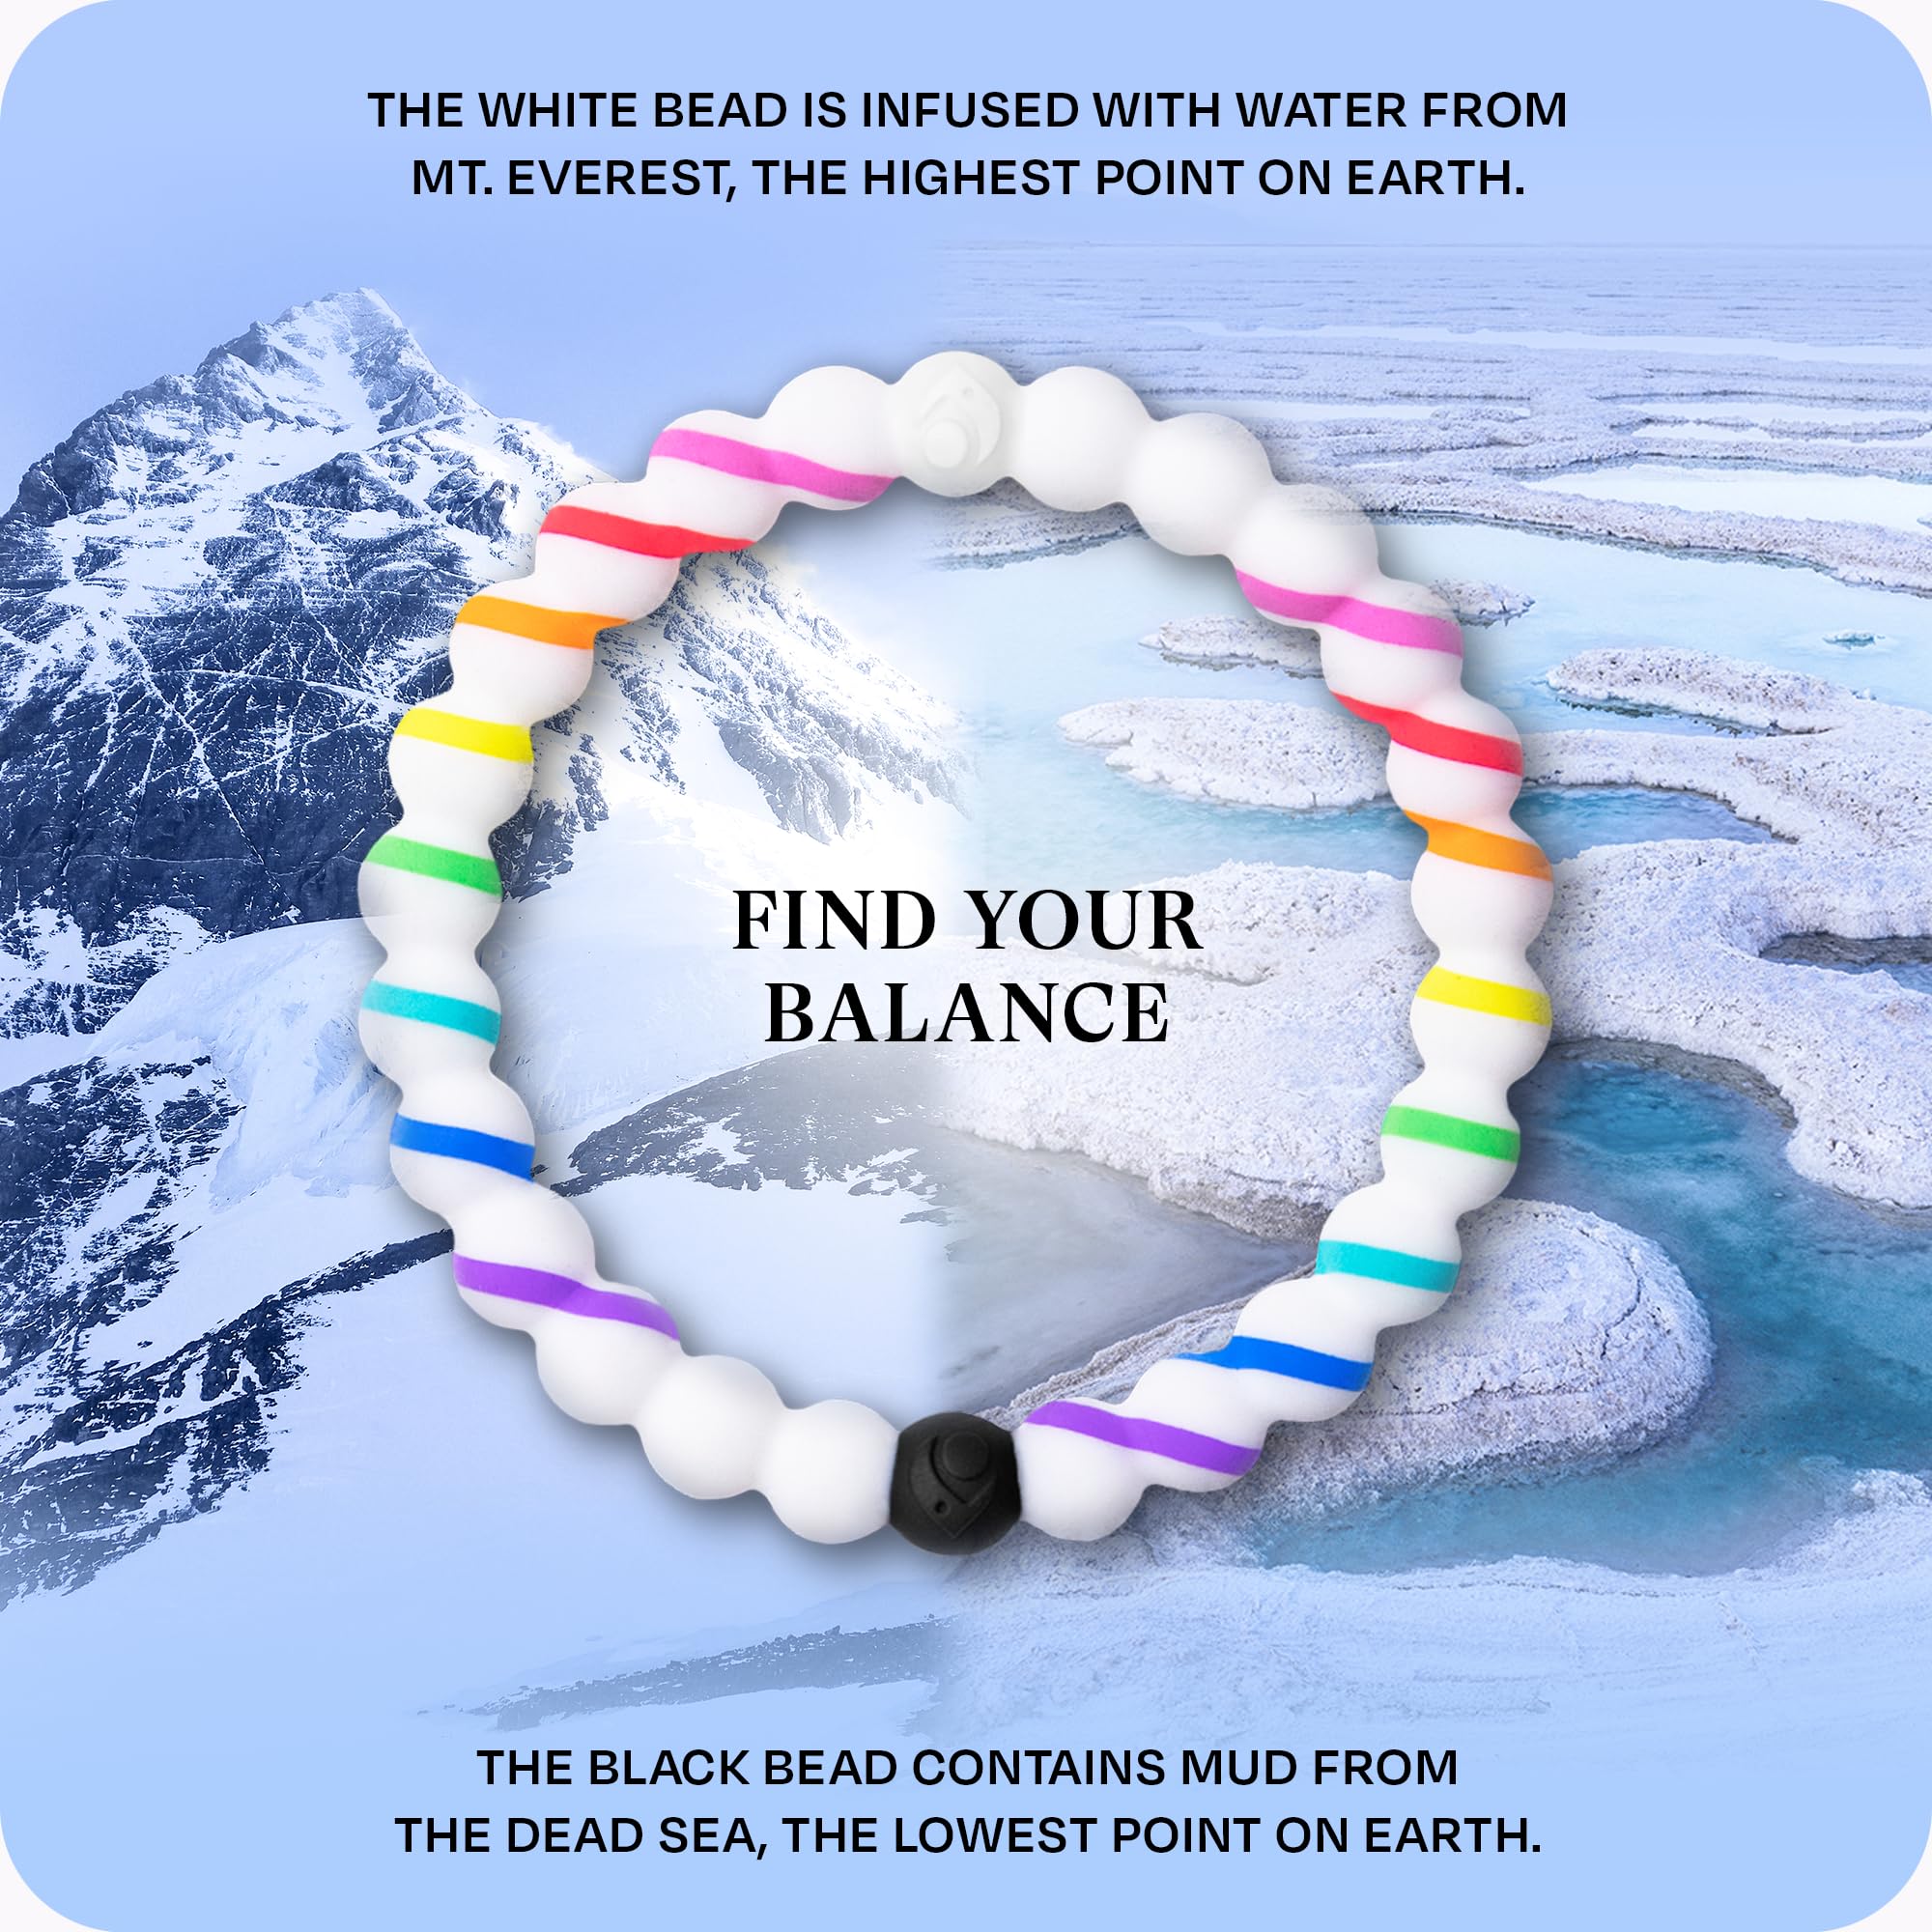 Lokai Silicone Beaded Bracelet, Pride Collection - Silicone Jewelry Fashion Bracelet Slides-On for Comfortable Fit for Men, Women & Kids